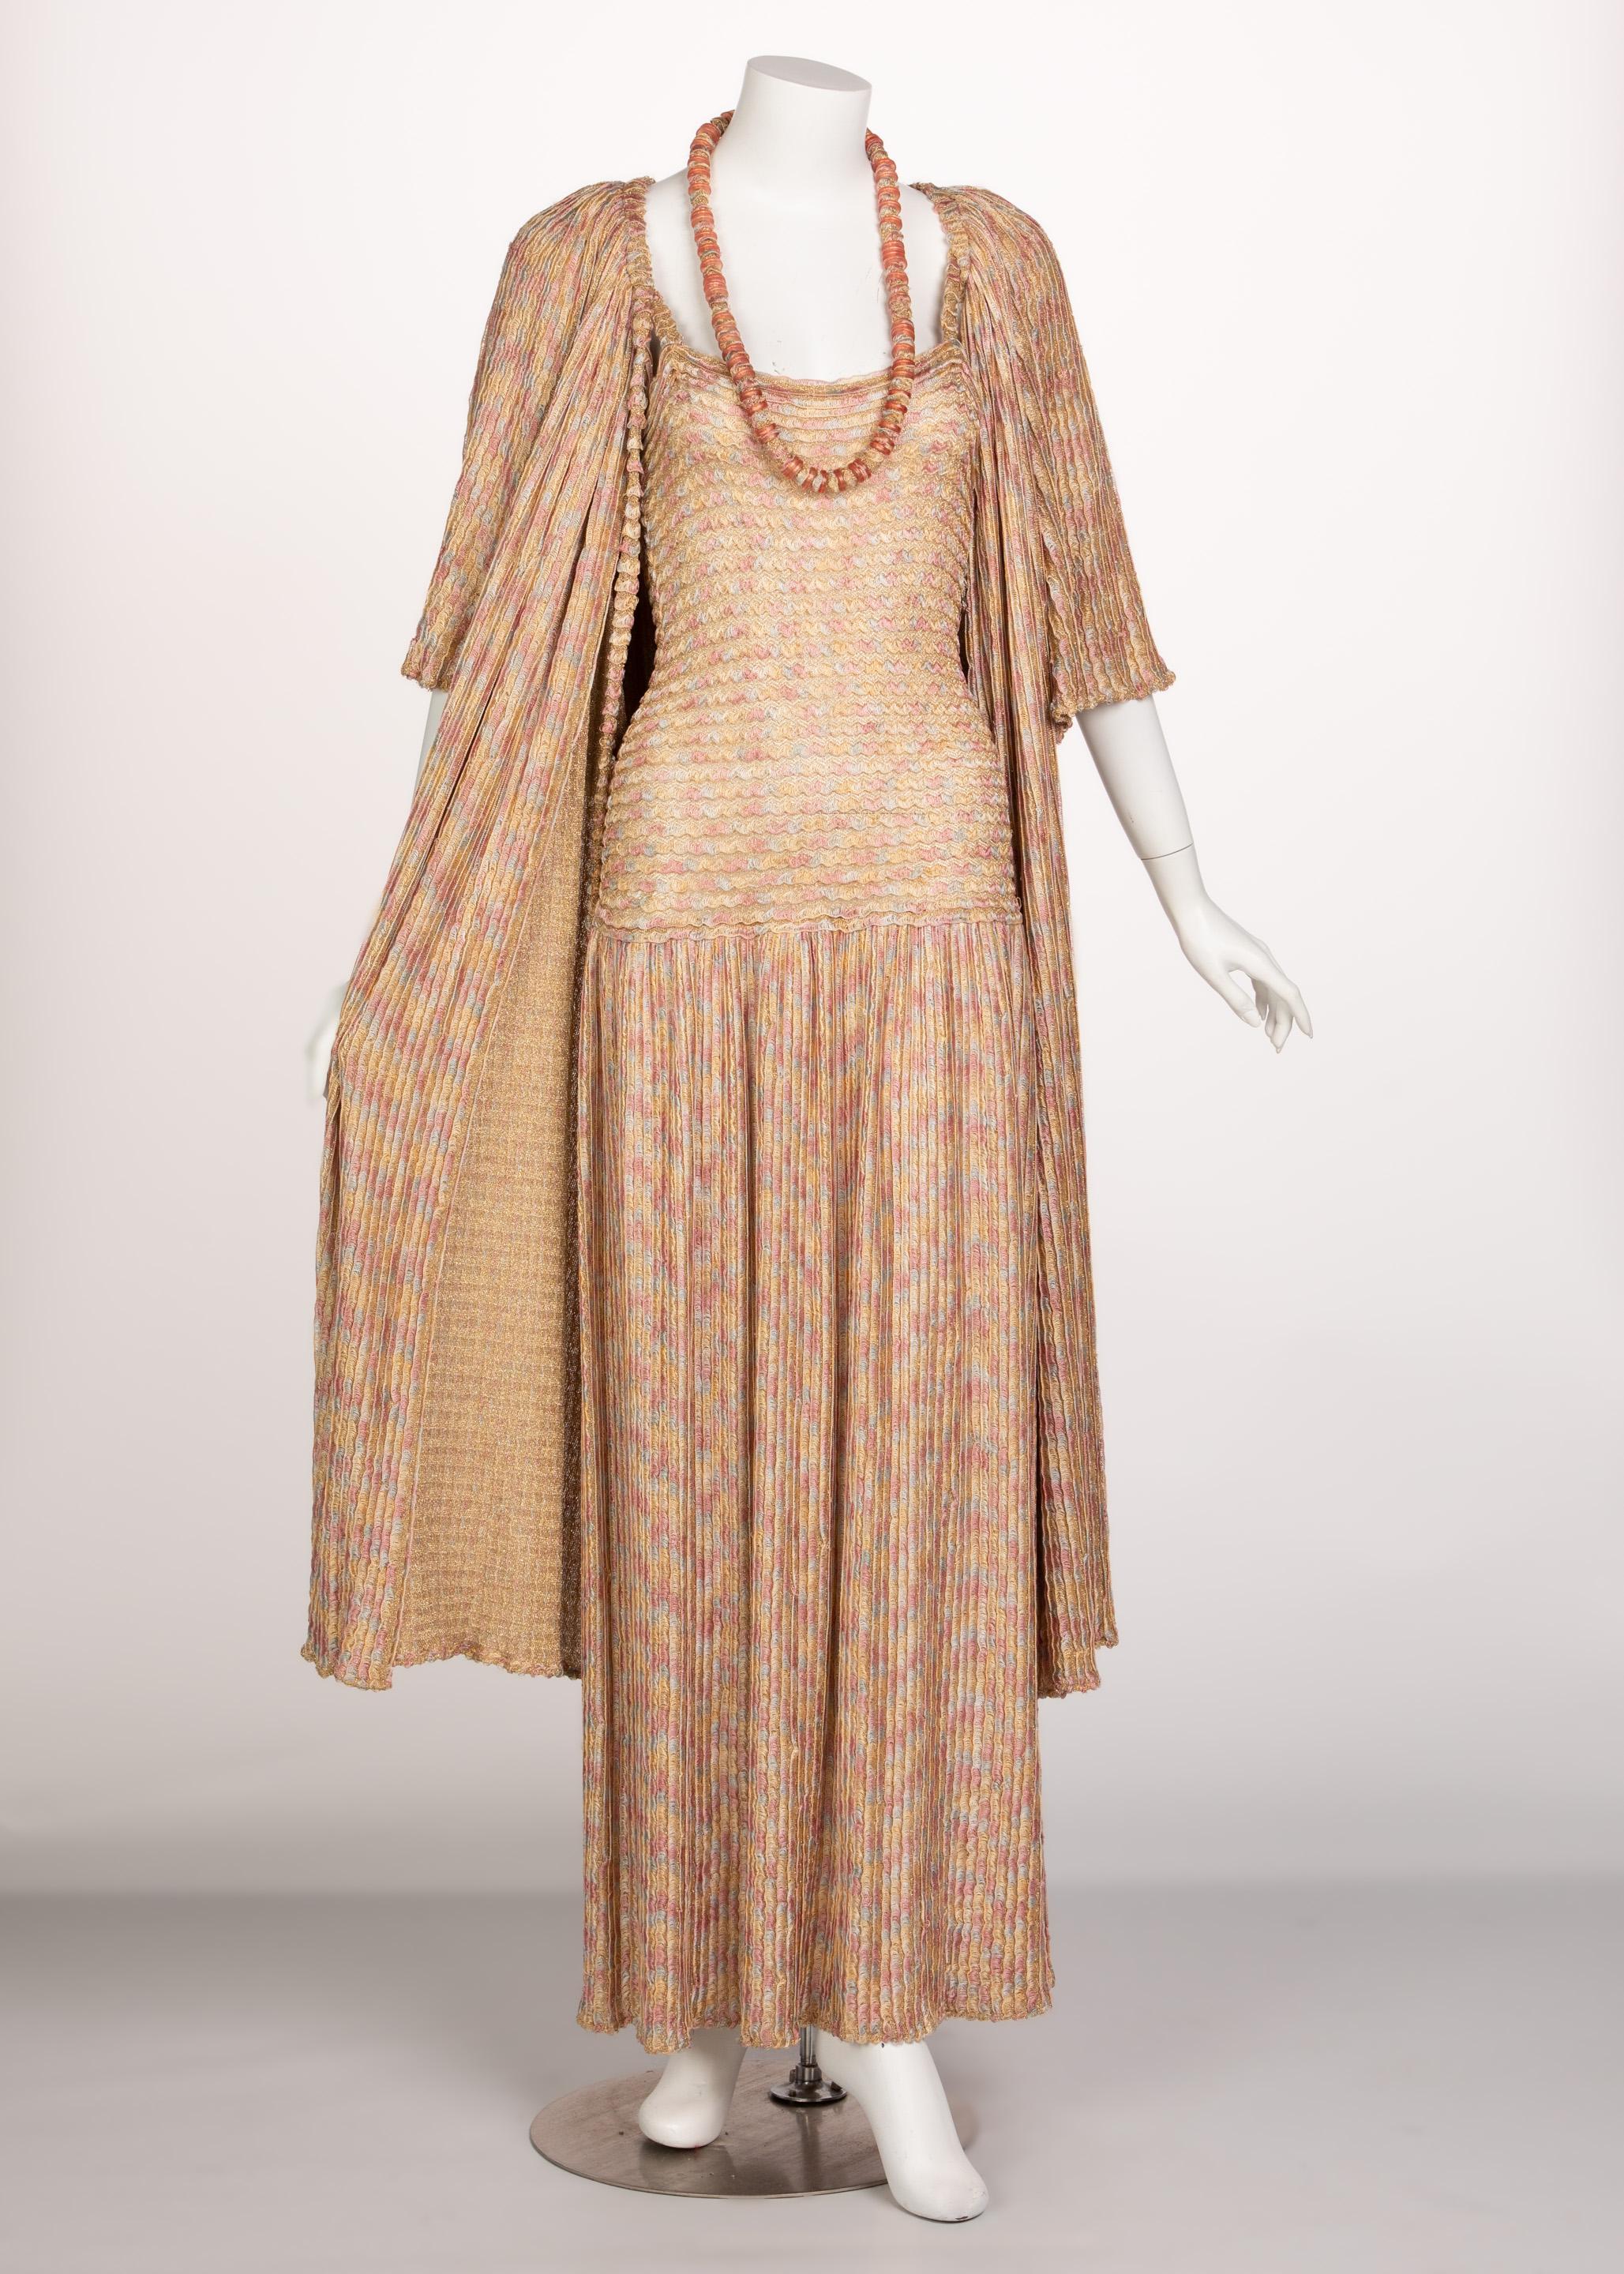 Missoni is defined by its impressionist color stories and signature knit designs. The designs speak to the idea of simplicity with the value always being in the fine details. Done in a silky rayon crochet knit, this 1970s Missoni ensemble is made